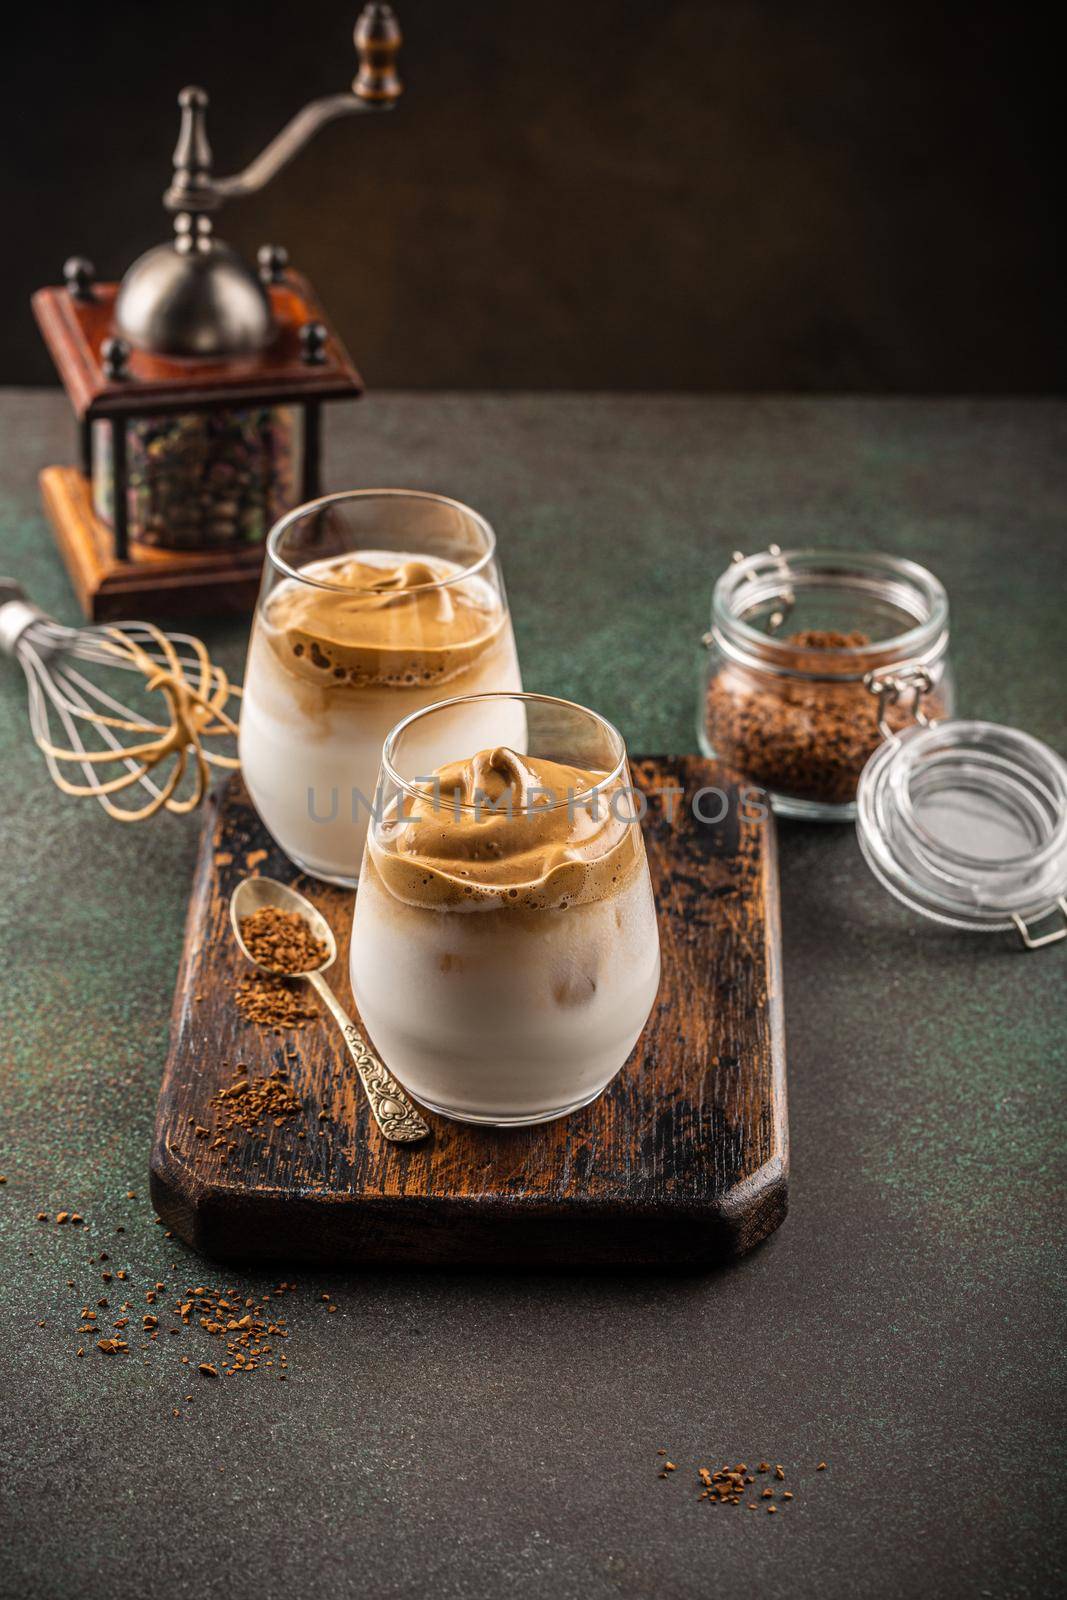 Korean trendy drink dalgona coffee from instant coffee, milk and ice on old wooden board. Modern drinks concept with copy space.